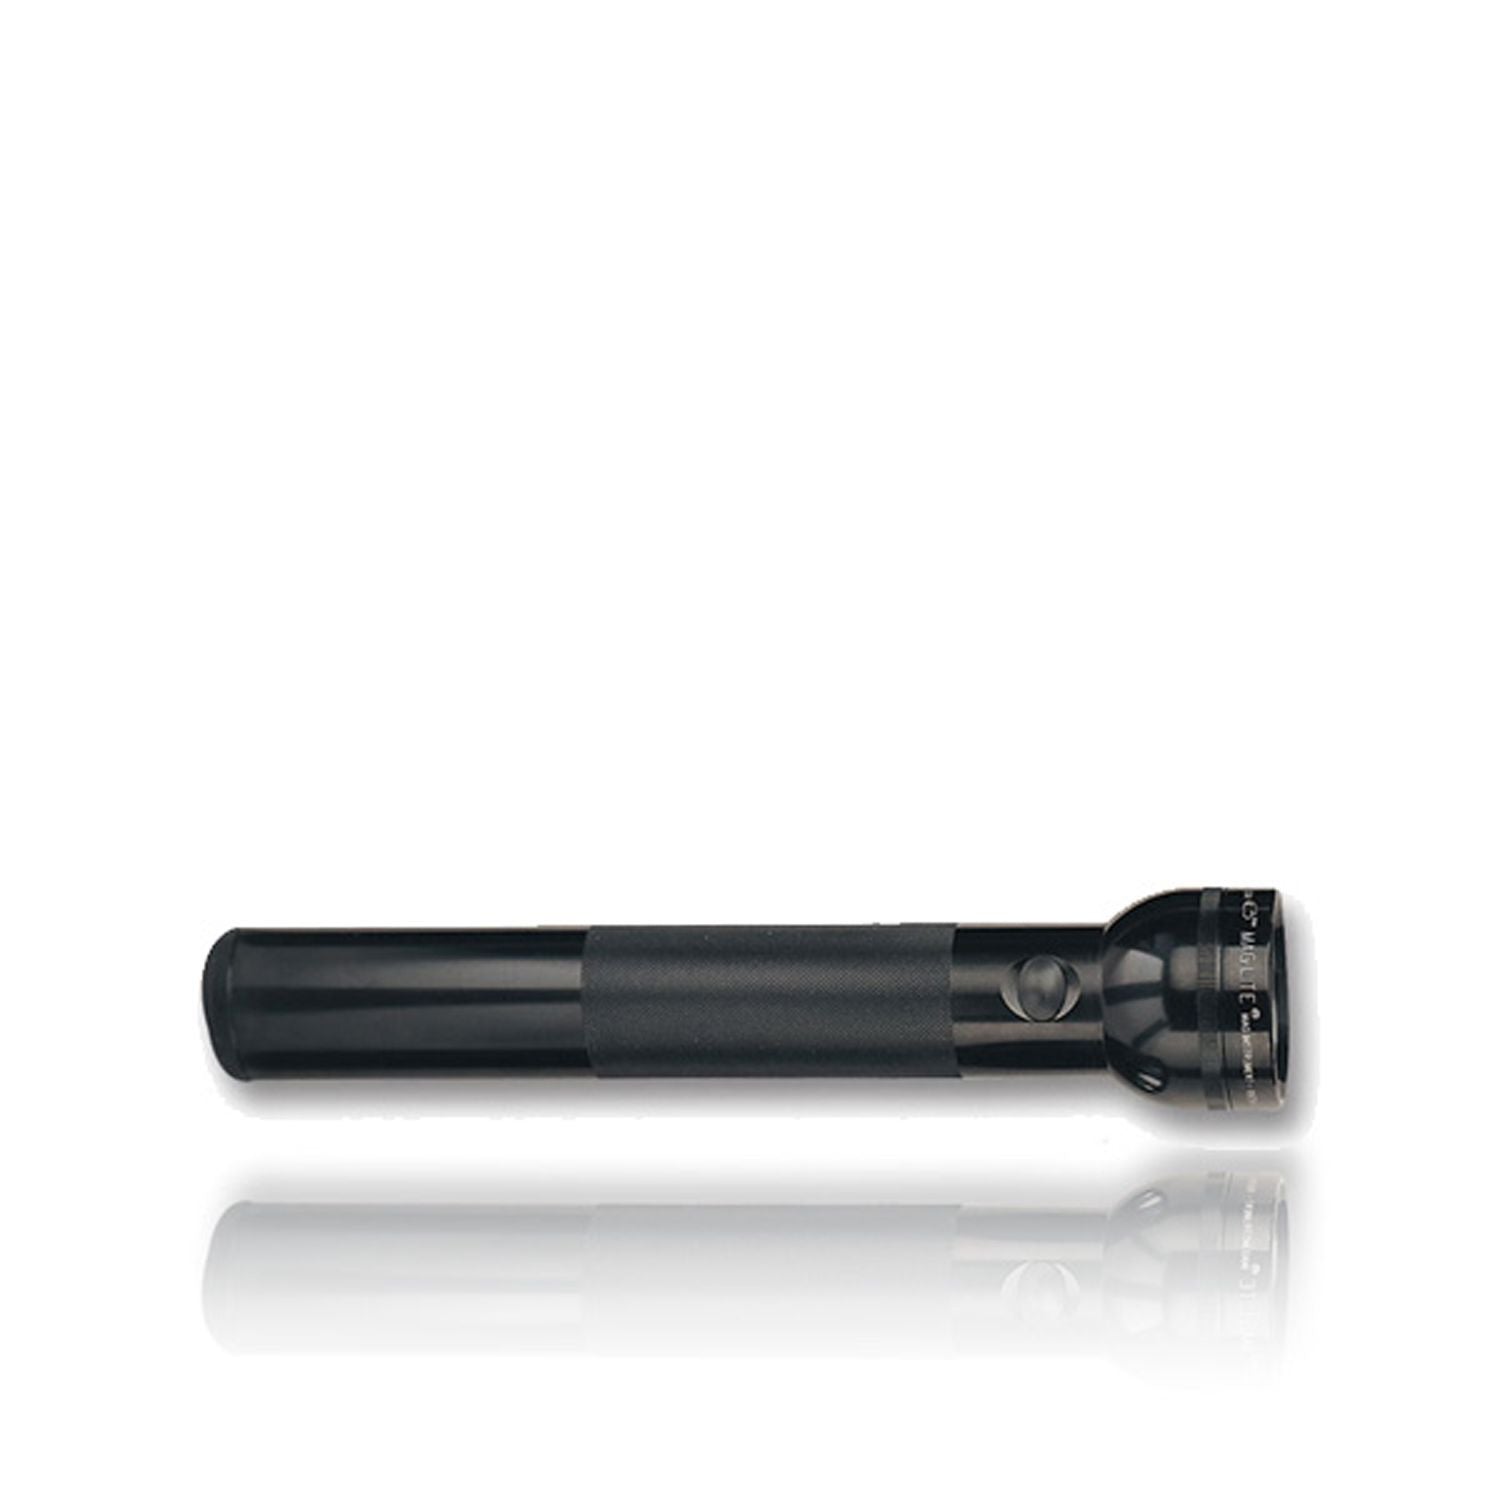 Maglite Mag-lite Torch, 4 Cell